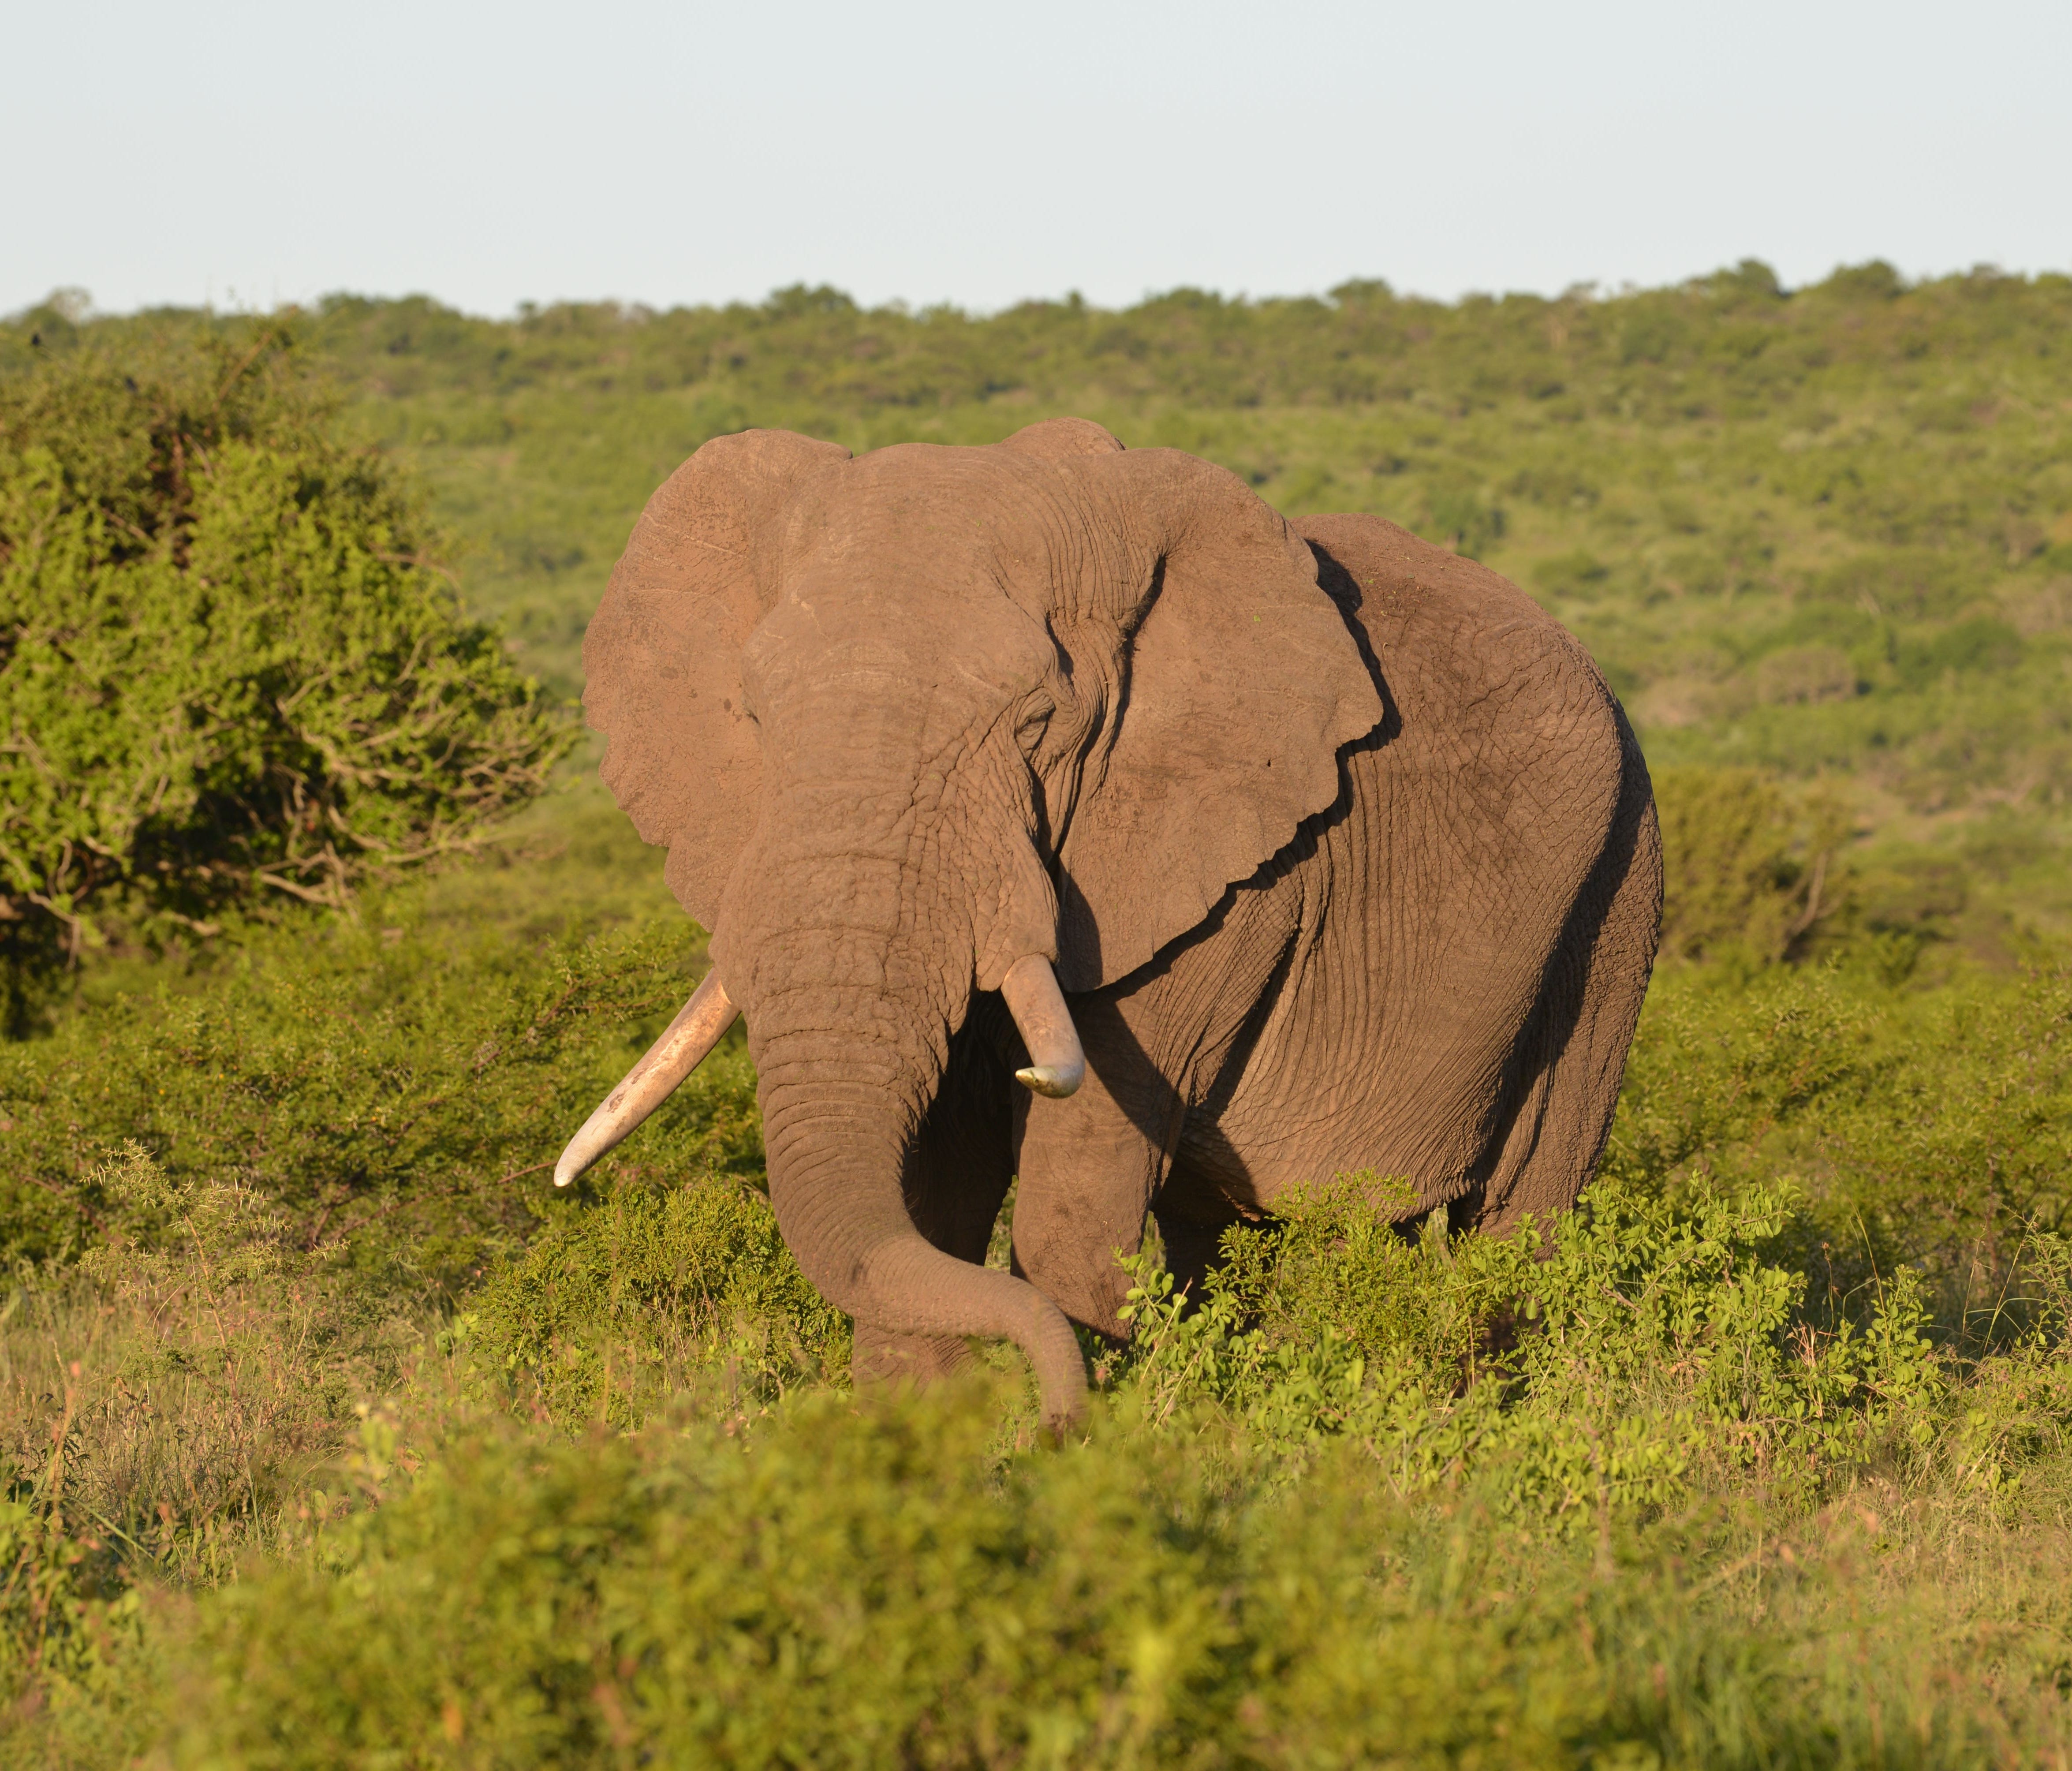 Elephants are the biggest of the 'big five' game animals to be found at the Phinda Private Game Reserve in South Africa.